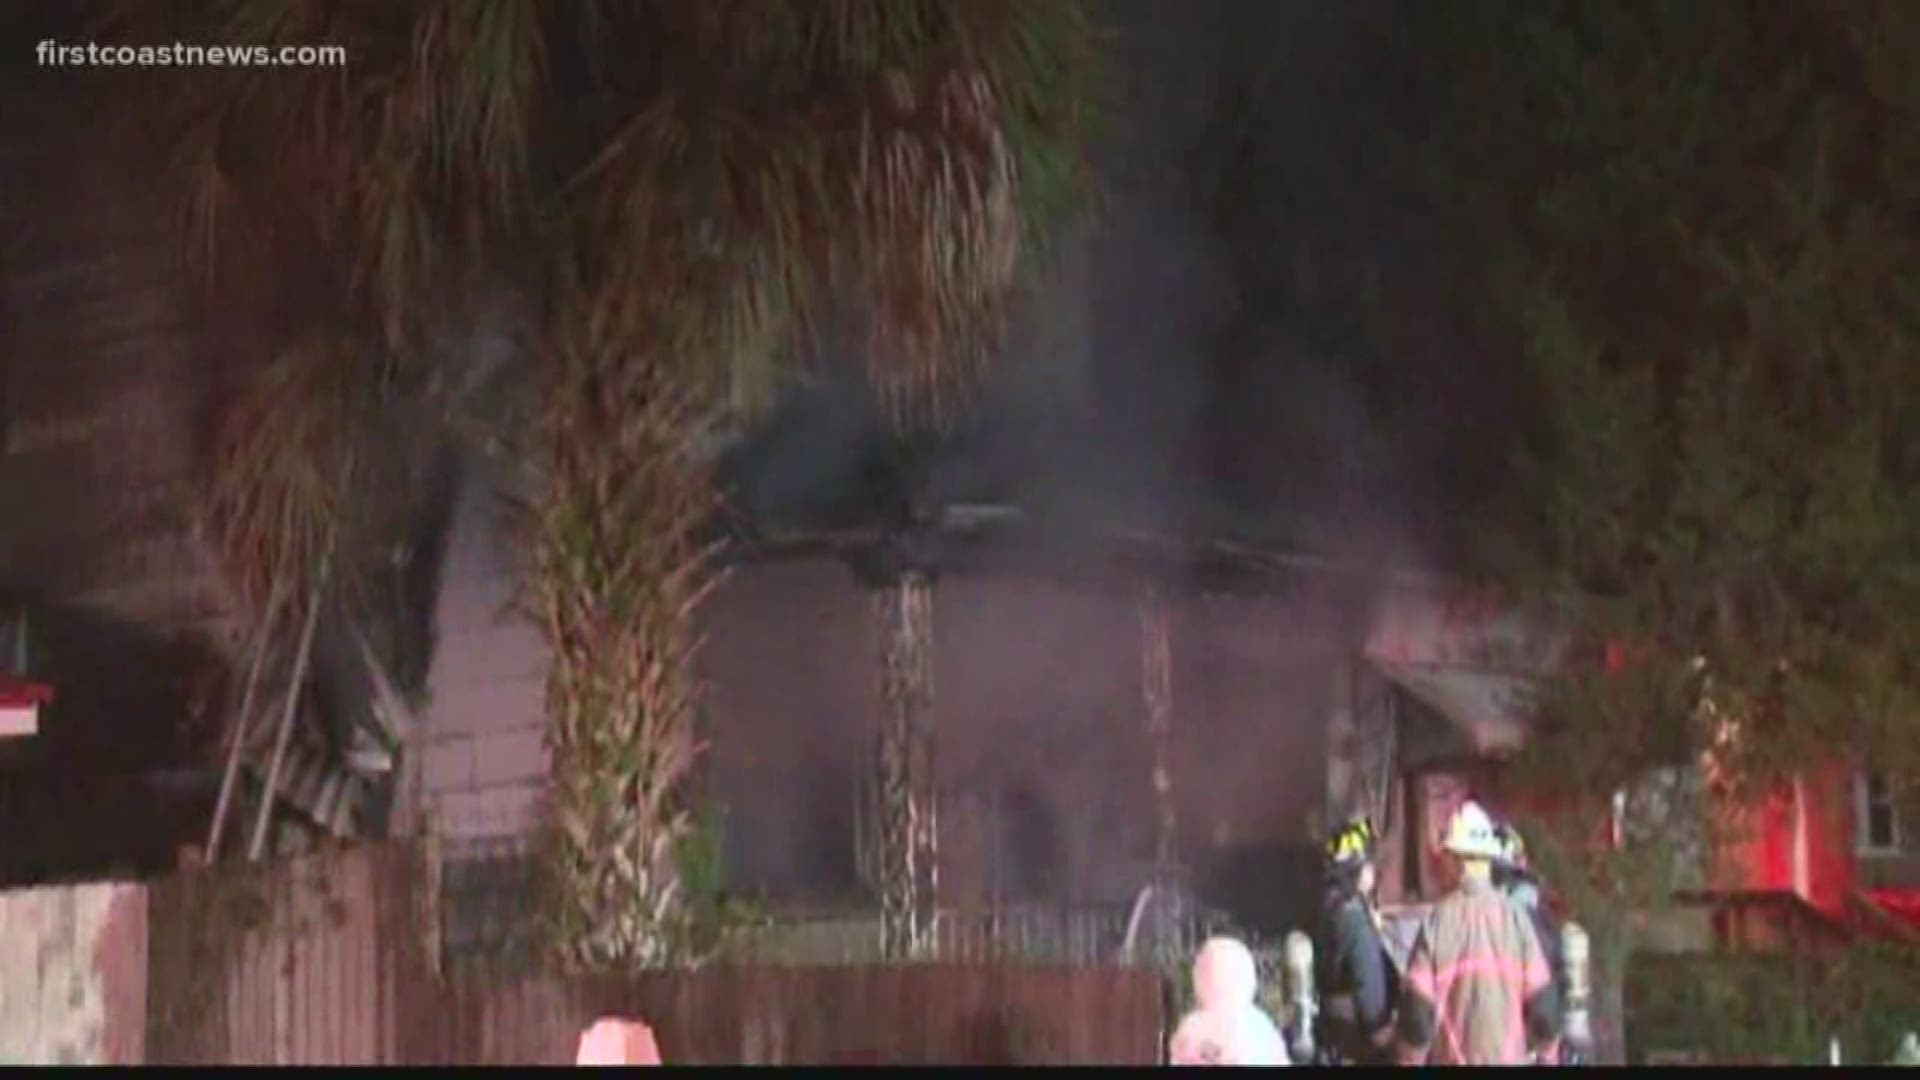 A piece of history went in flames when a house caught fire in a historic St. Augustine neighborhood.